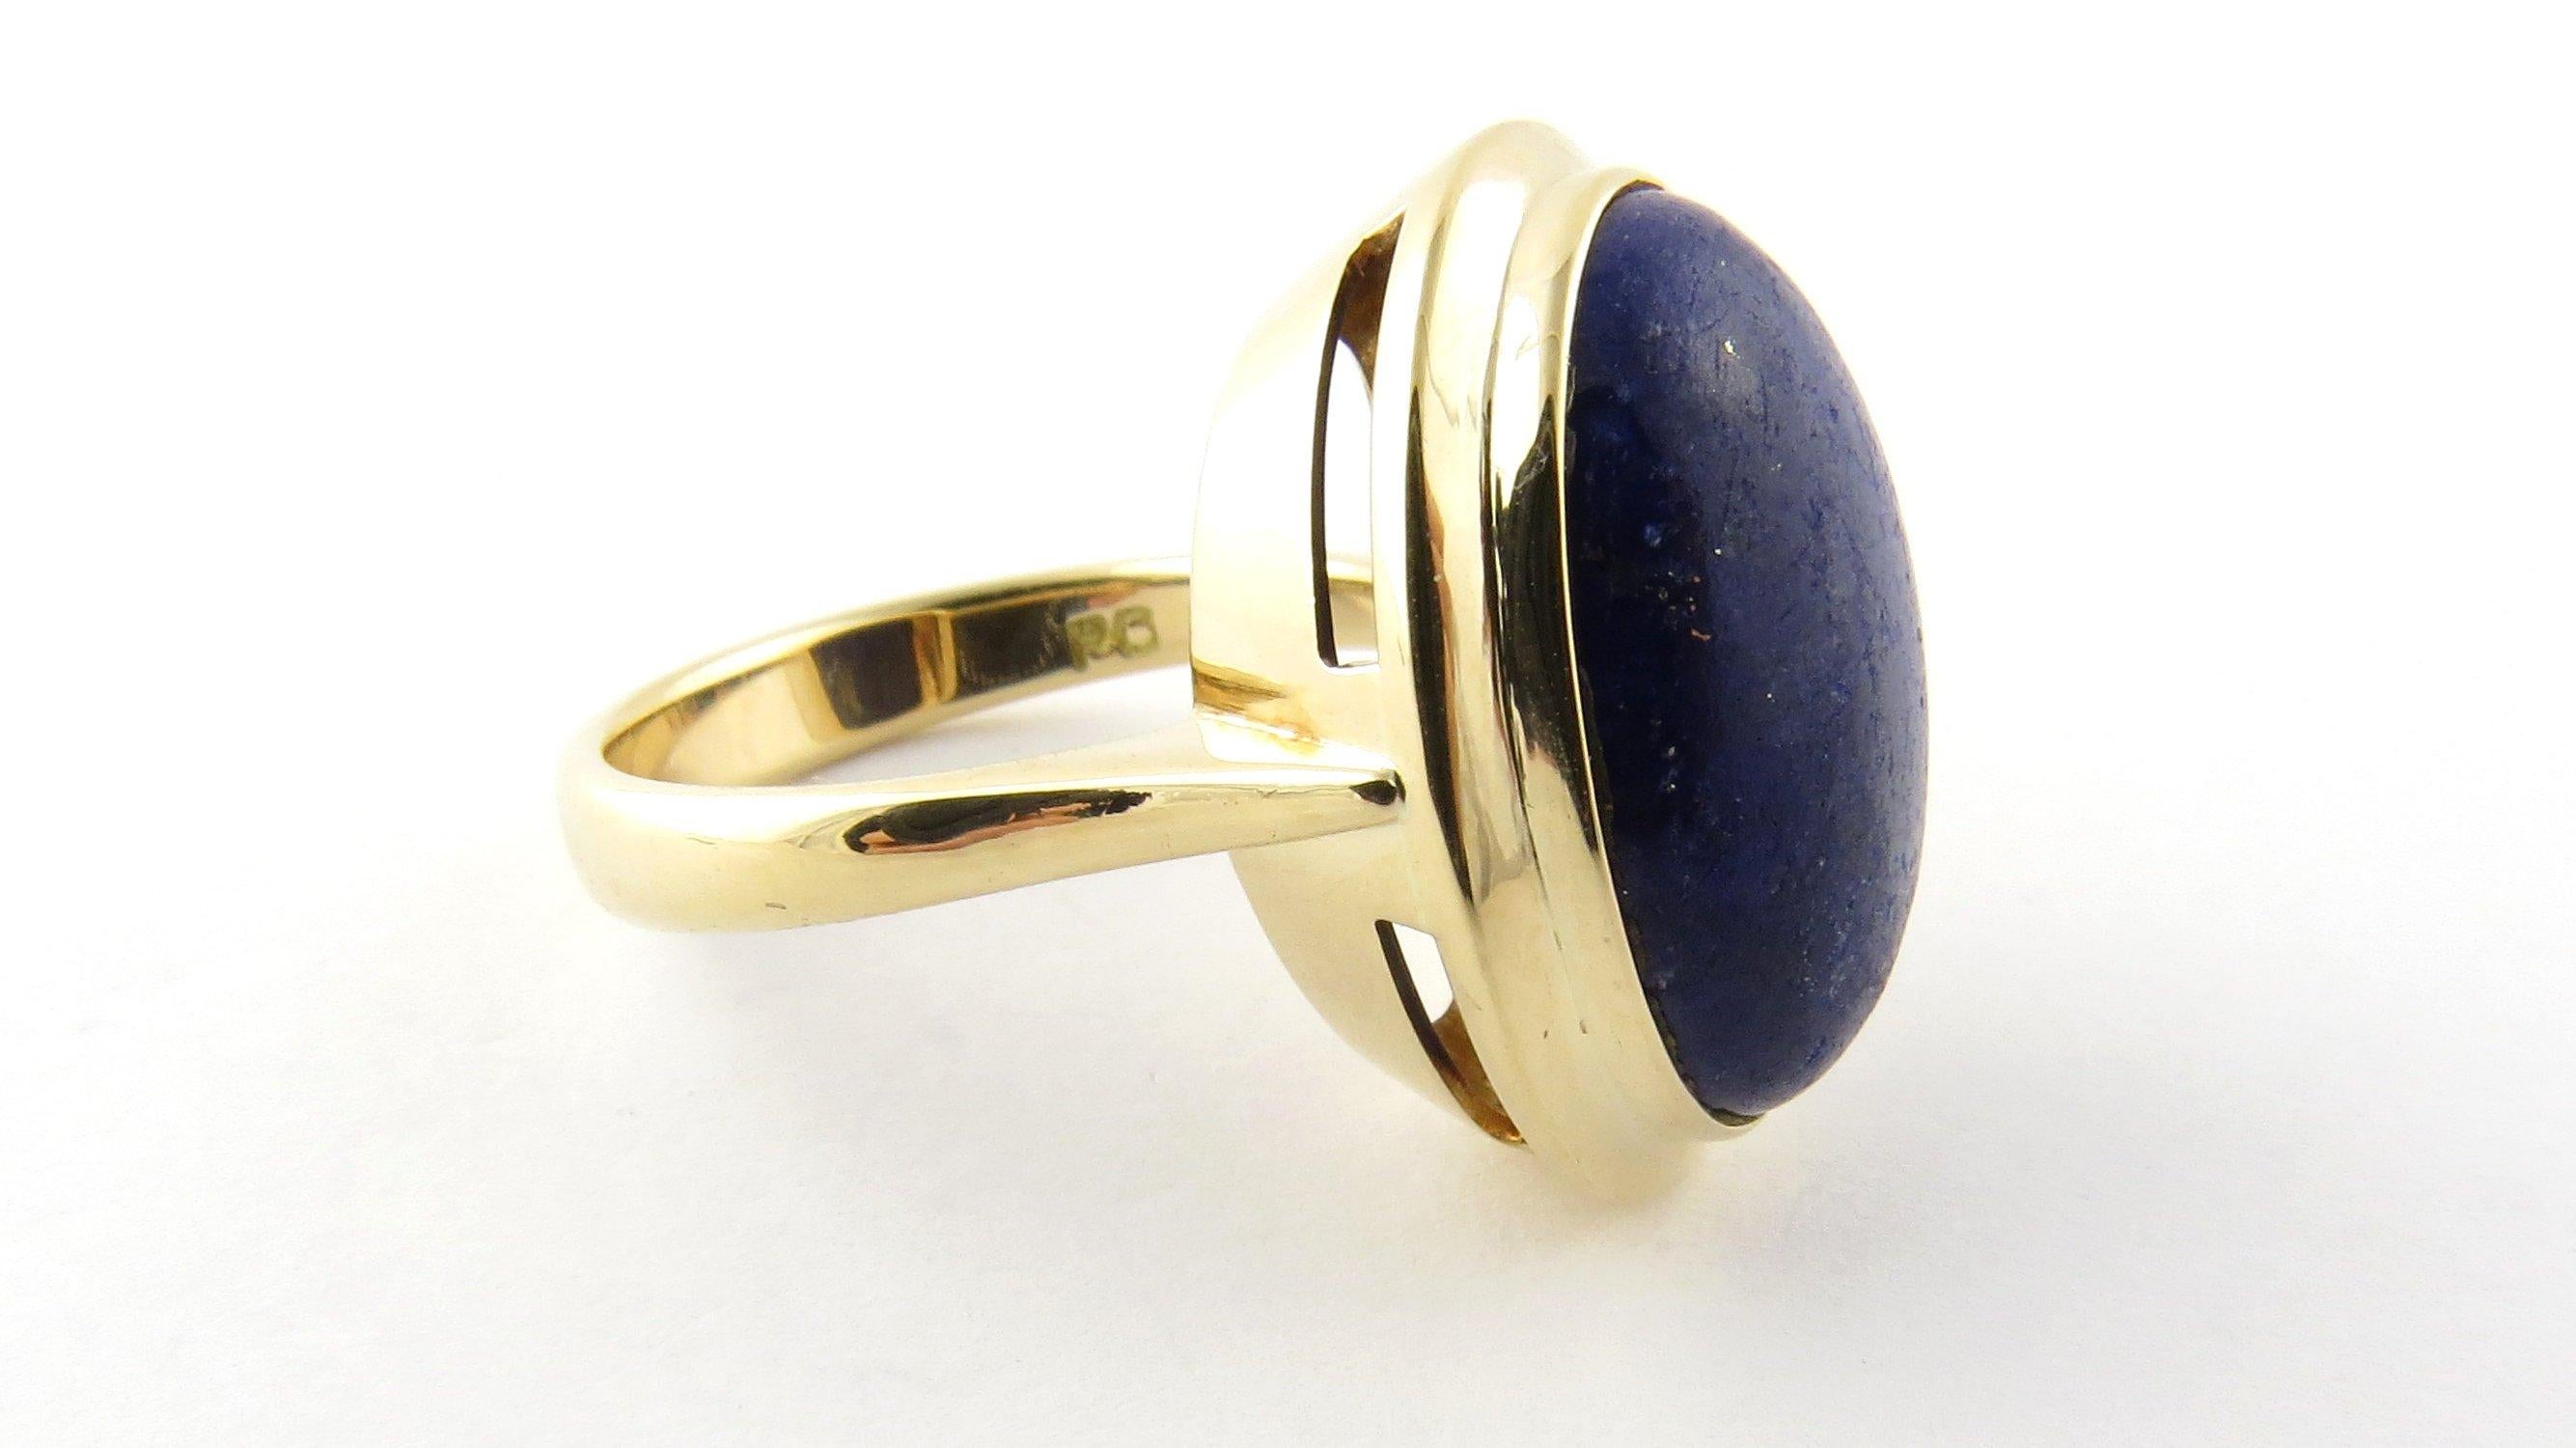 Vintage 14 Karat Yellow Gold and Genuine Blue Lapis Ring Size 6.5. This stunning ring features one oval genuine blue lapis stone (18 mm x 13 mm) set in classic 14K yellow gold. Shank measures 4 mm. 
Ring Size: 6.5 Weight: 5.1 dwt. / 8.0 gr. Stamped: